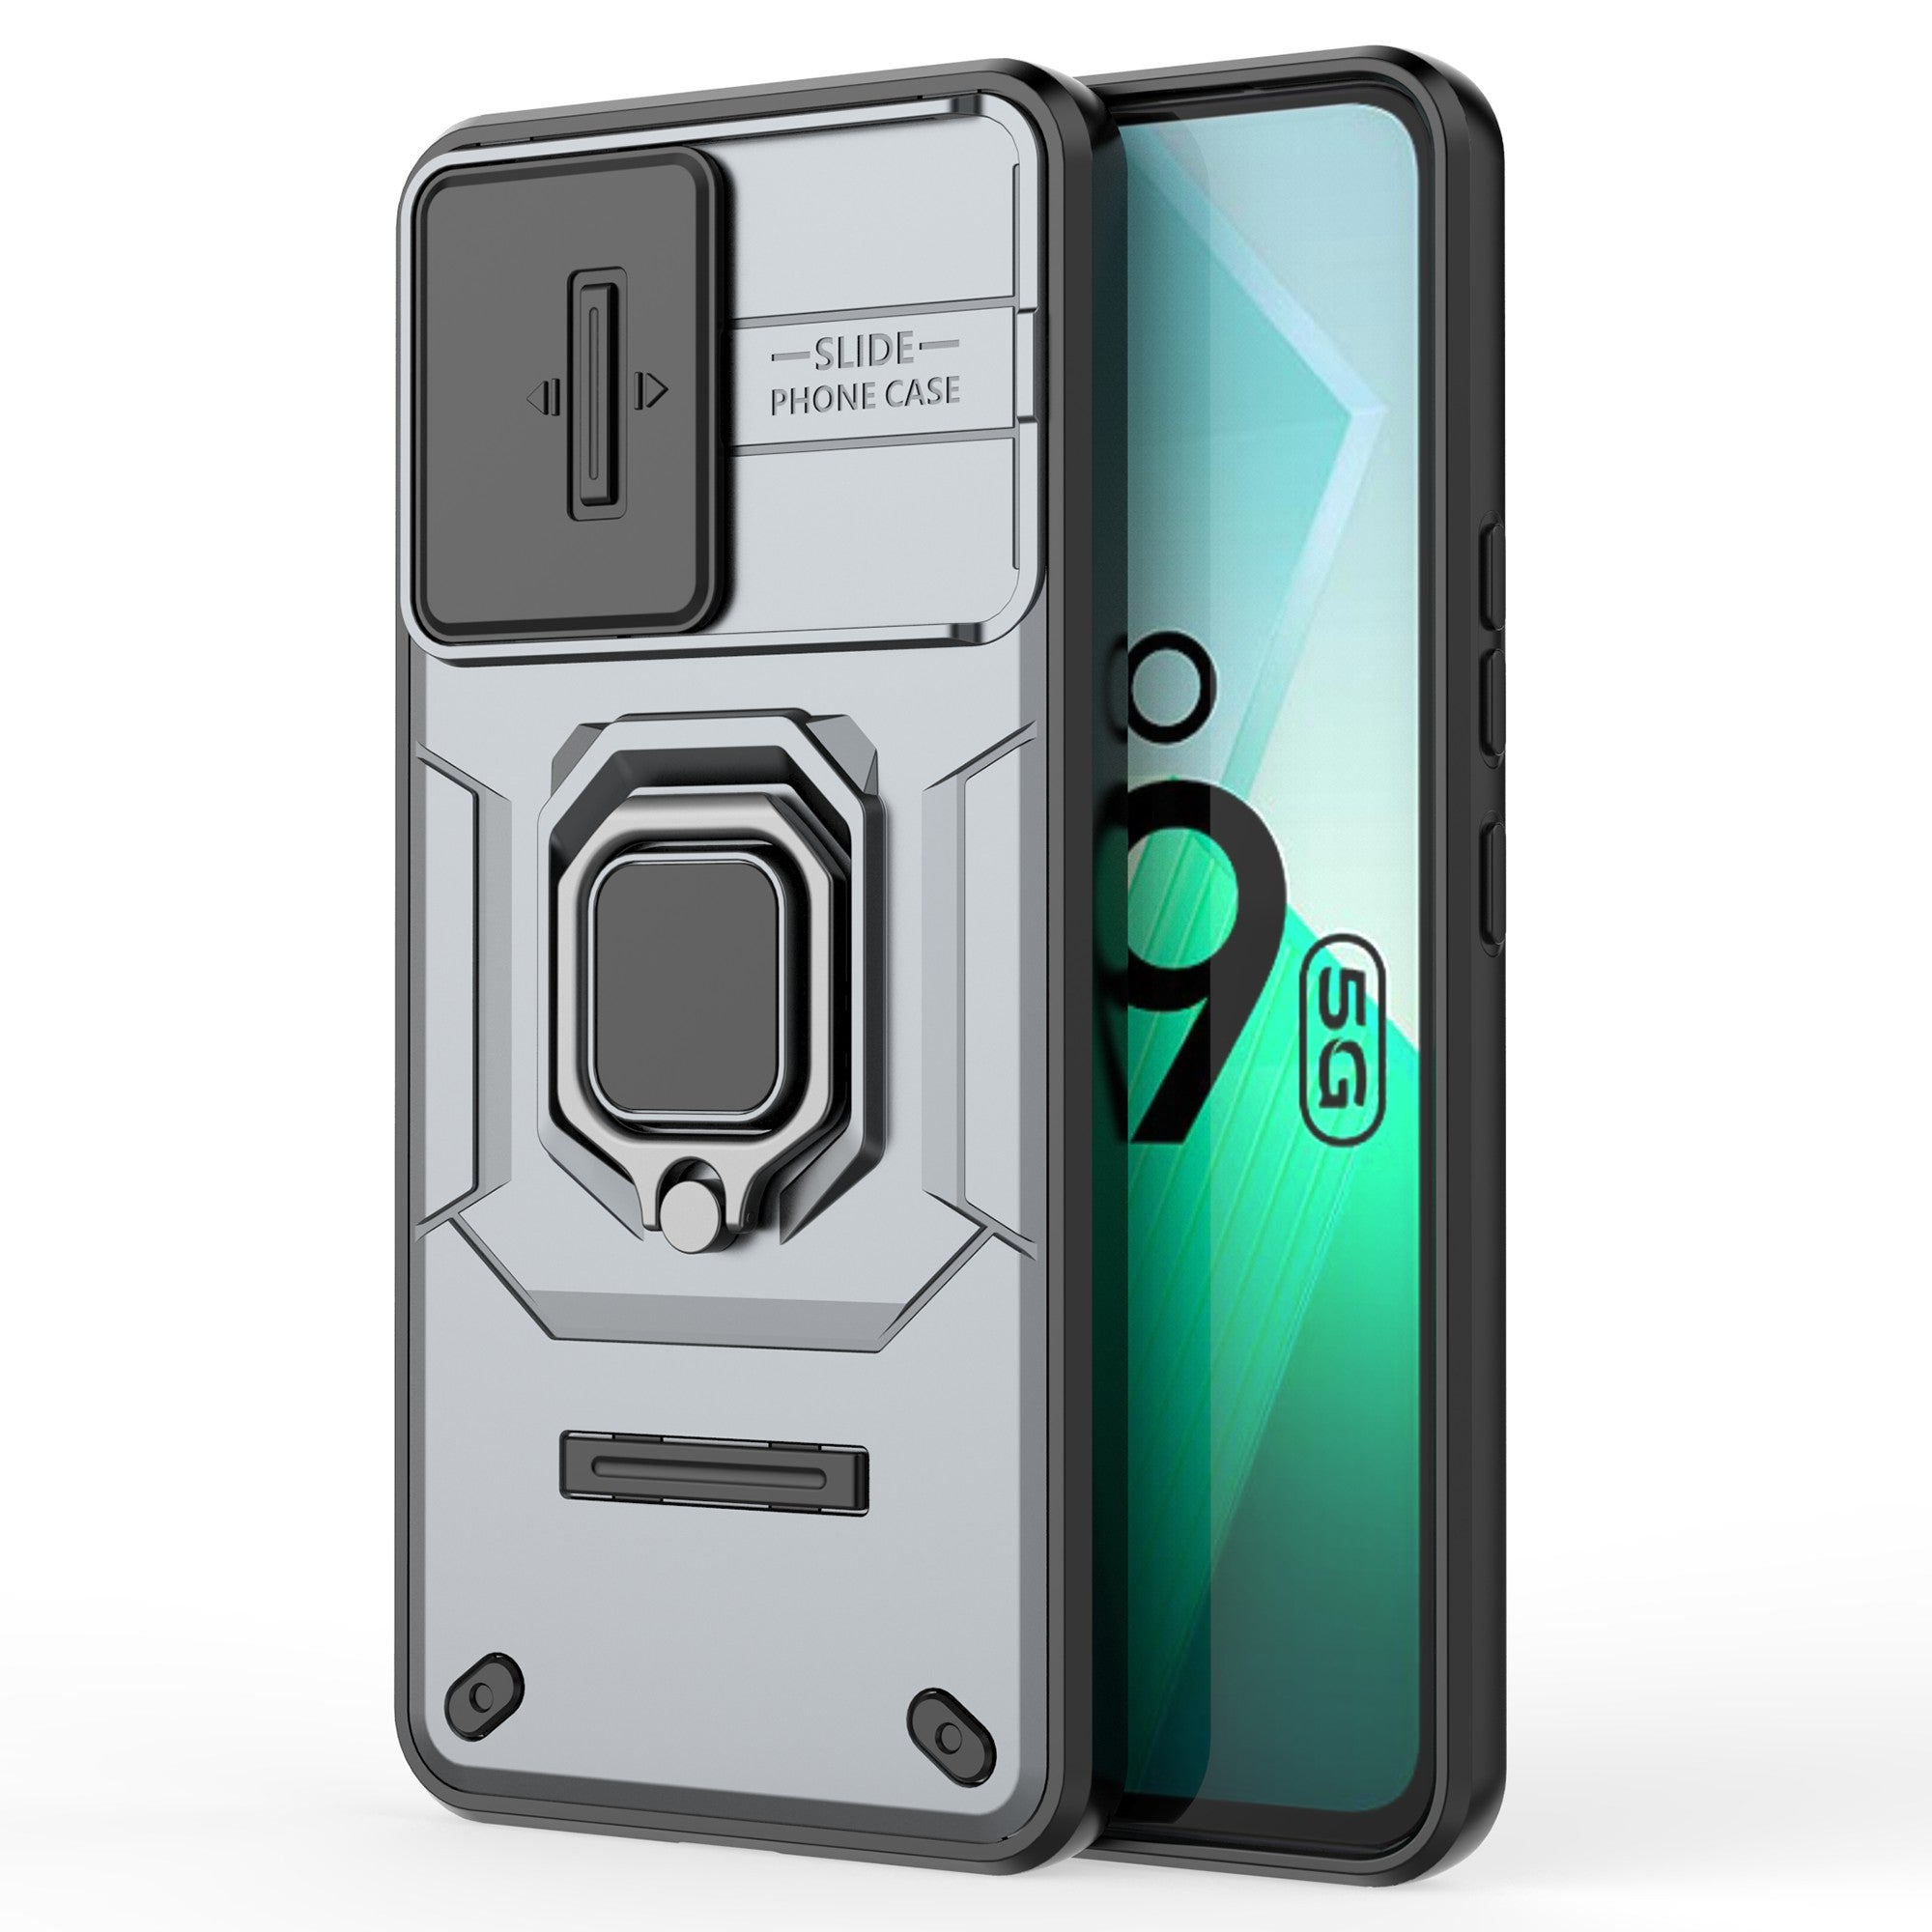 For vivo iQOO Z9 5G Camera Protection Case Kickstand Shockproof Rugged PC+TPU Phone Cover - Grey